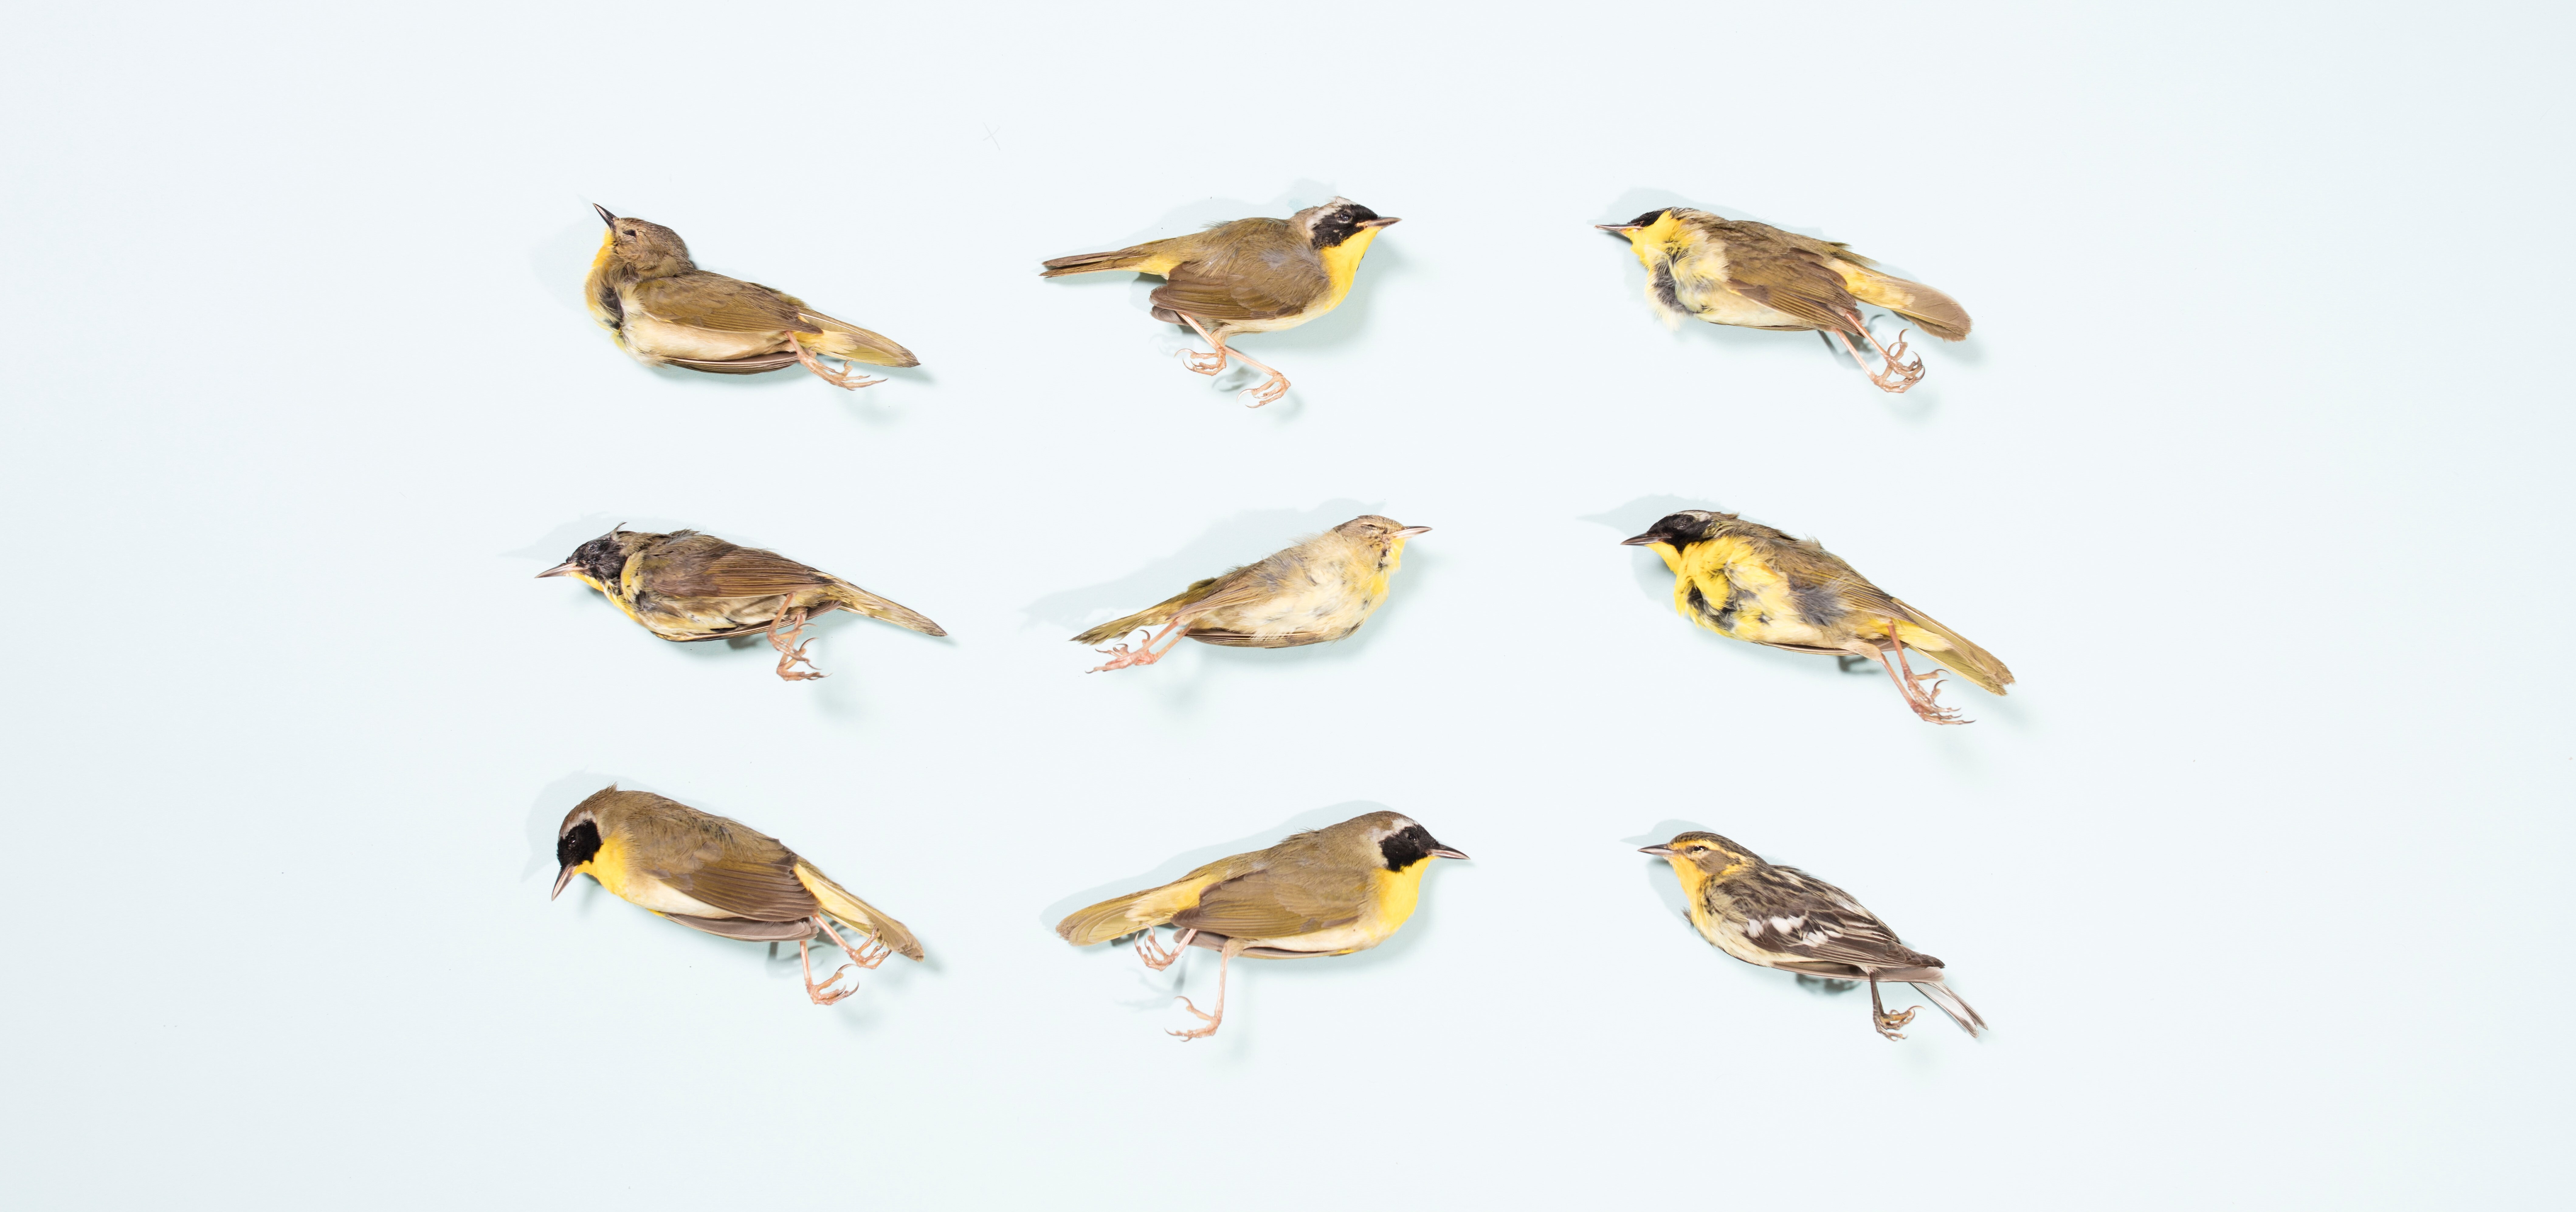 Among the warblers, the Common Yellowthroat is the most frequently found collision victim in New York City—but 32 warbler species have been found here, including the Blackburnian Warbler (bottom right). Photo: Sophie Butcher